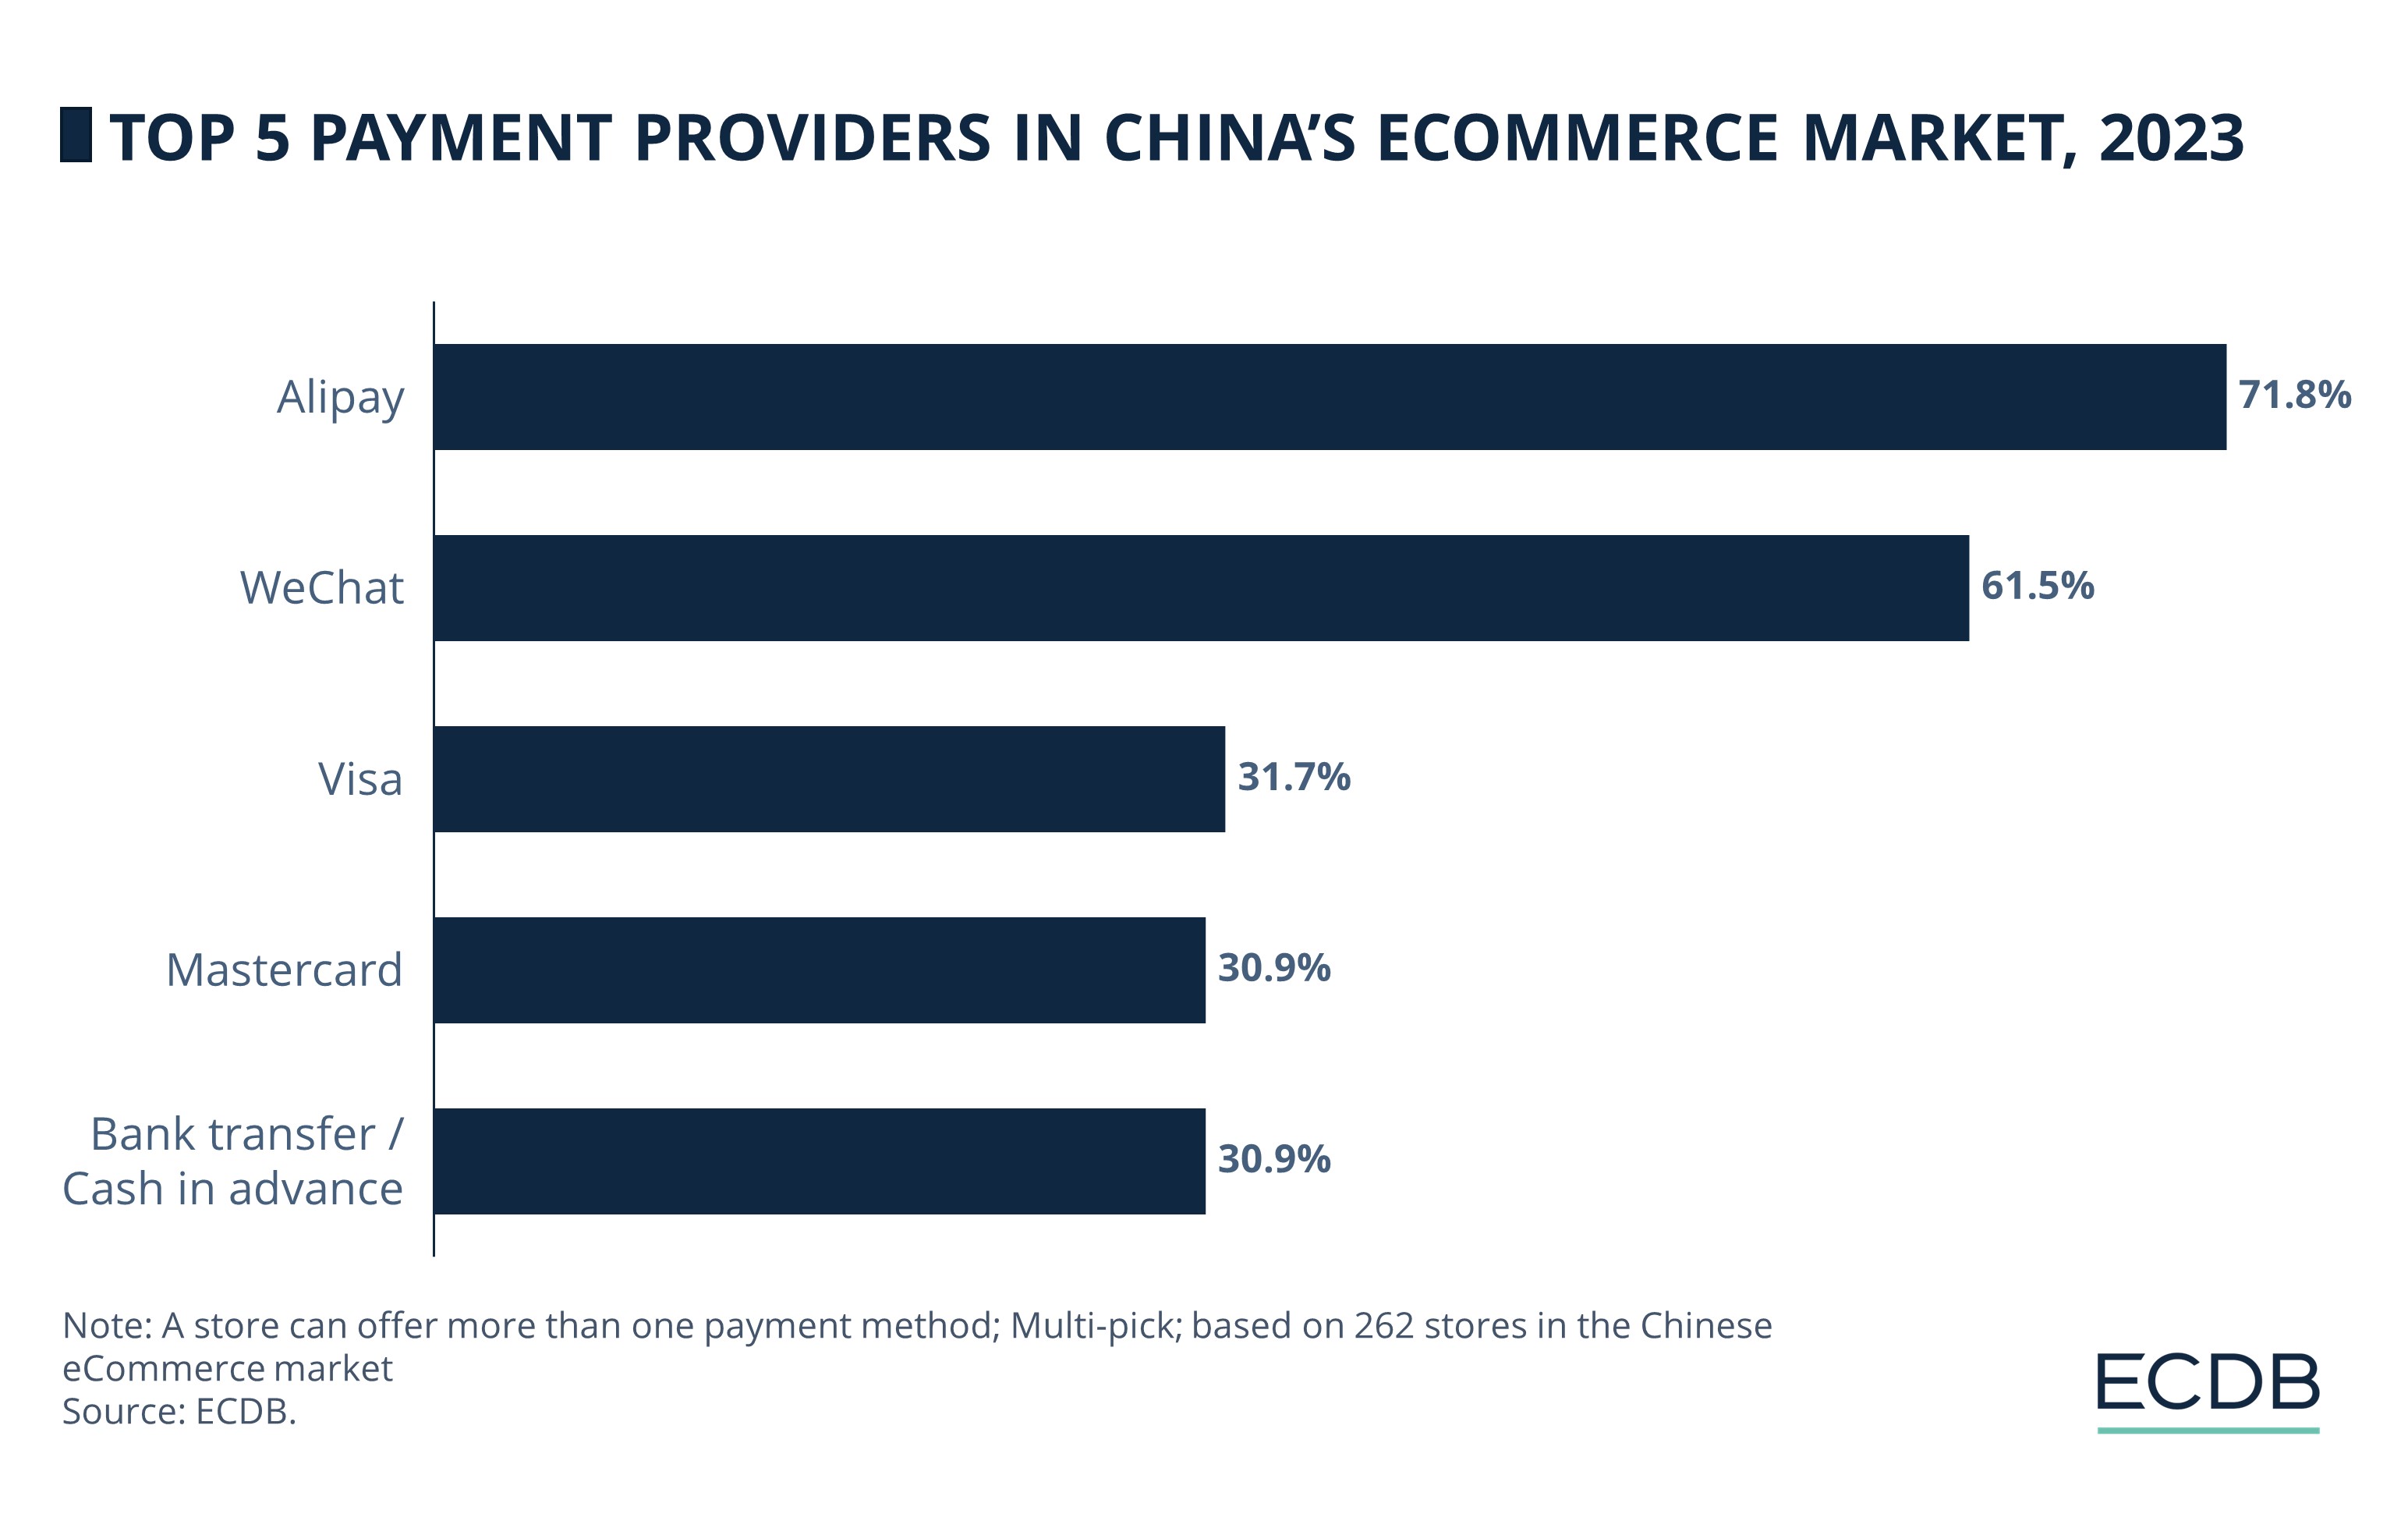 Top 5 Payment Providers in China’s Ecommerce Market, 2023